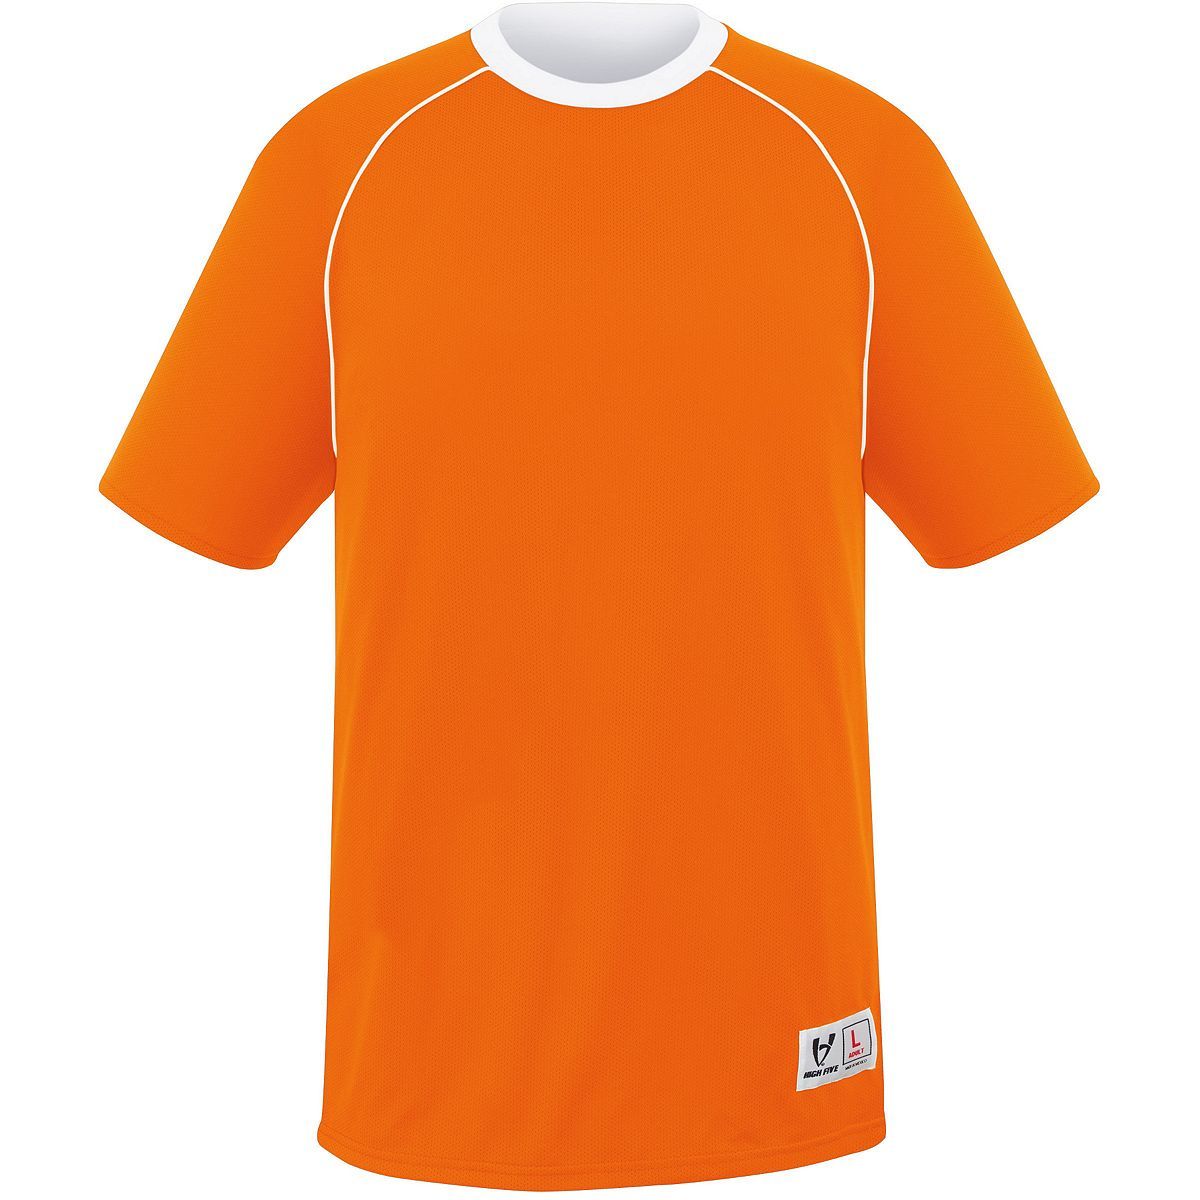 High 5 Youth Conversion Reversible Jersey in Orange/White  -Part of the Youth, Youth-Jersey, High5-Products, Soccer, Shirts, All-Sports-1 product lines at KanaleyCreations.com